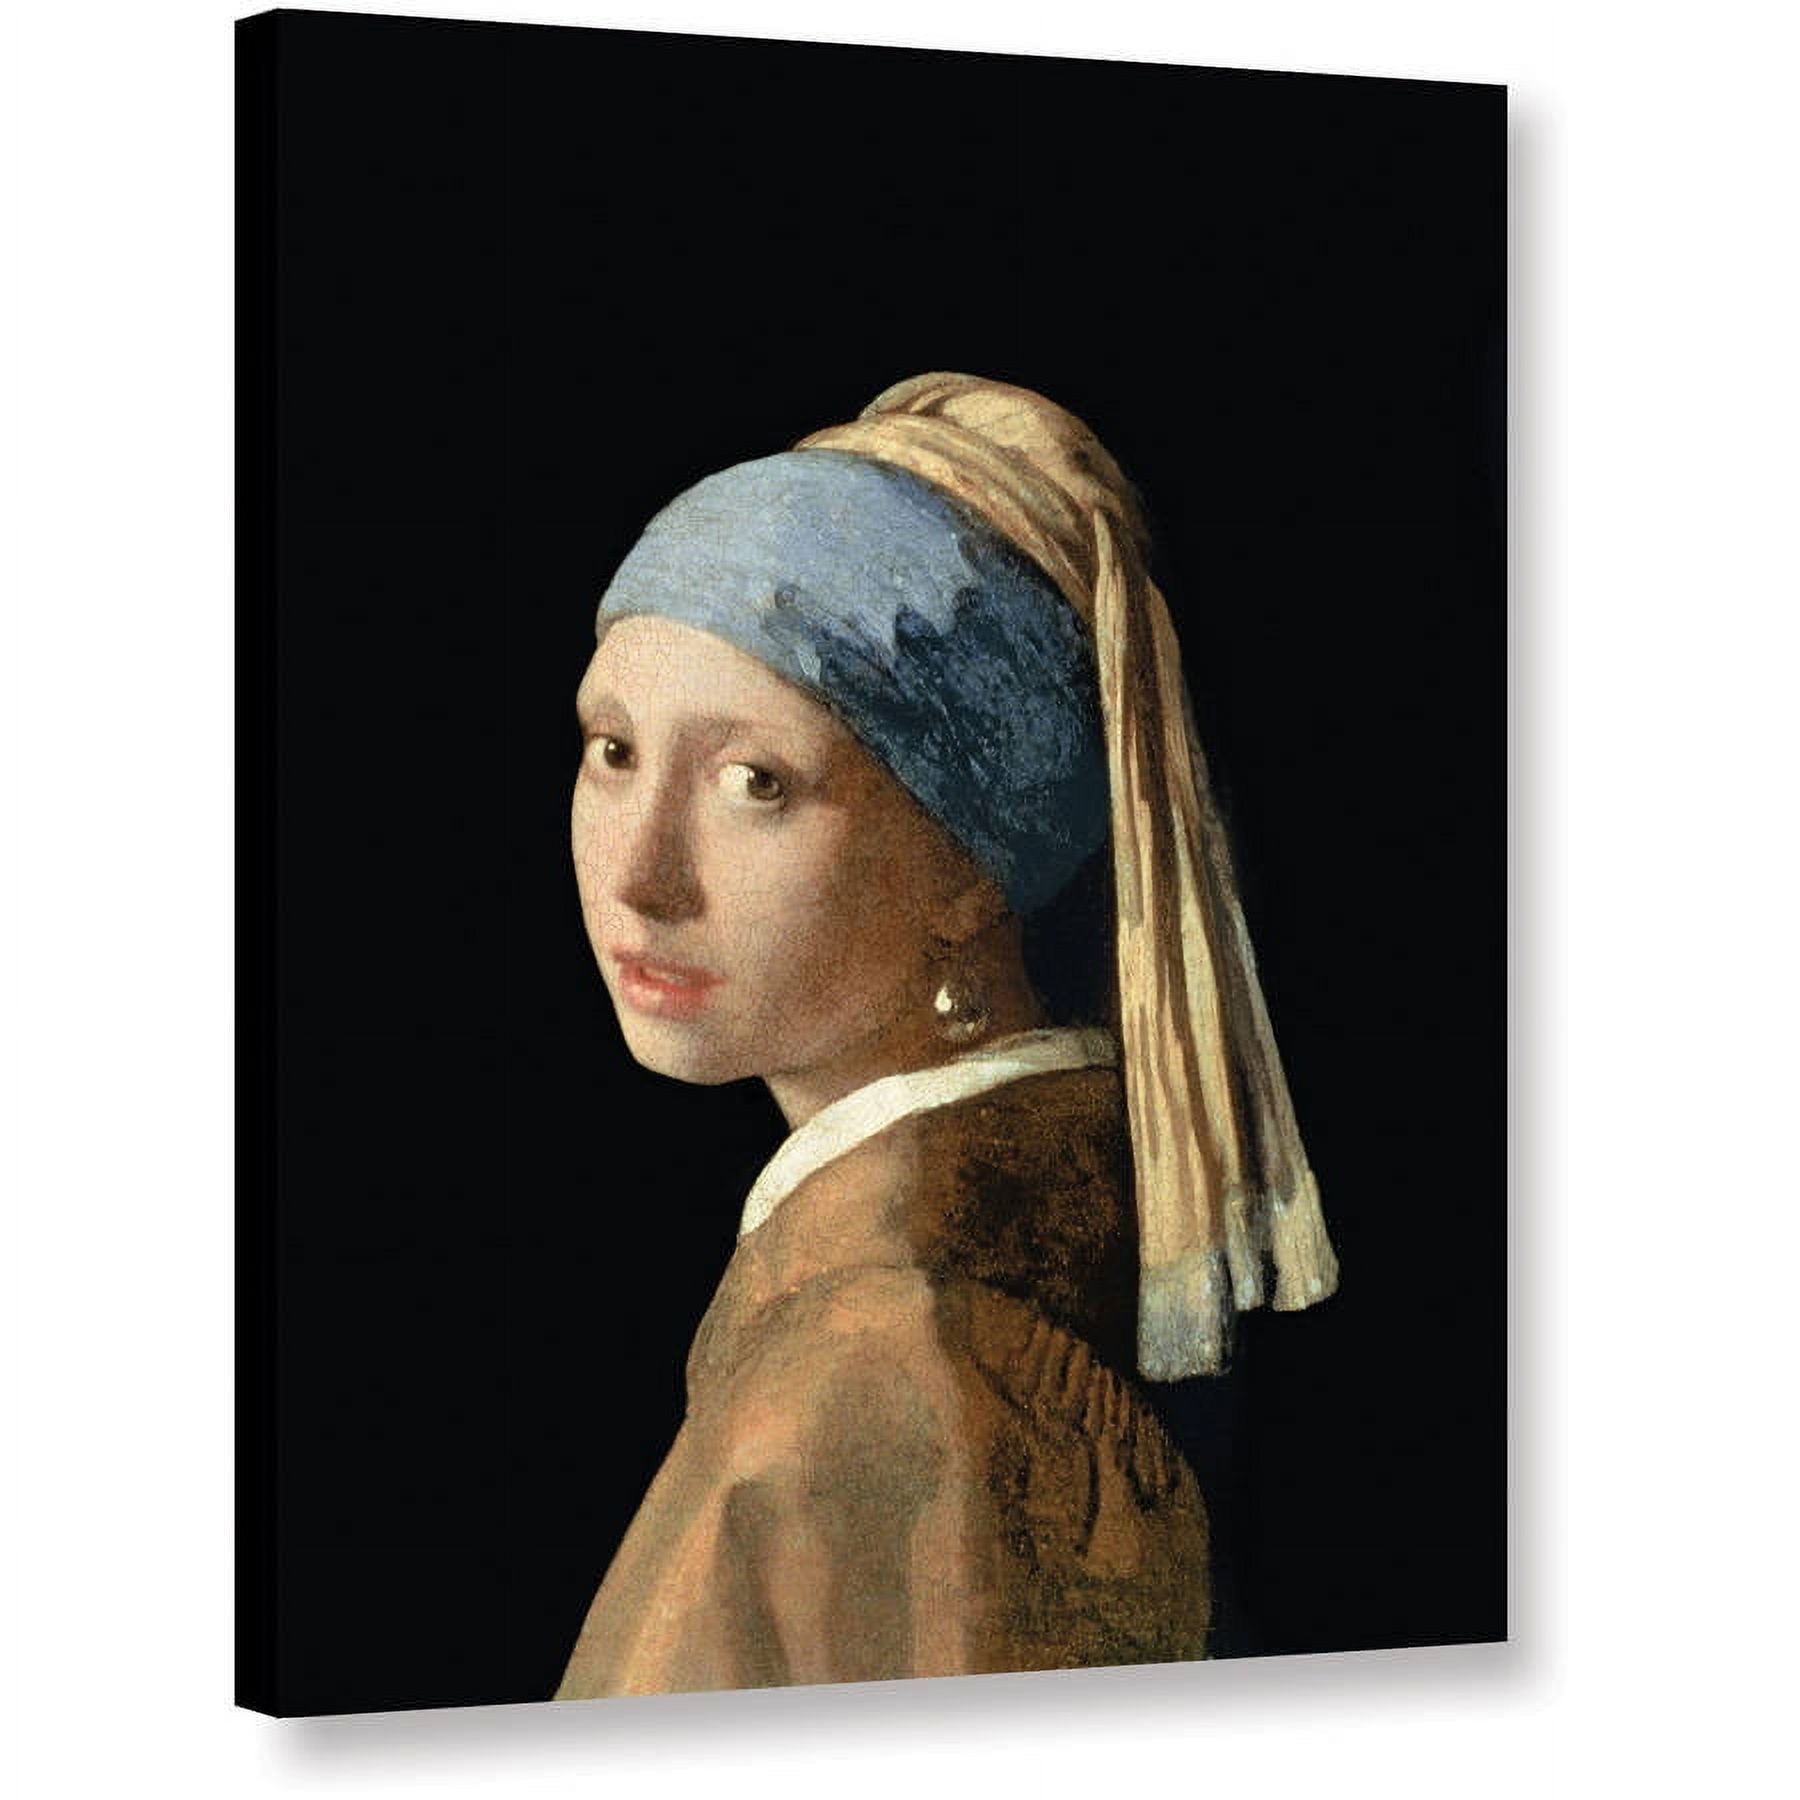 Johannes Vermeer "Girl With A Pearl Earring" Gallery-Wrapped Canvas - image 1 of 1